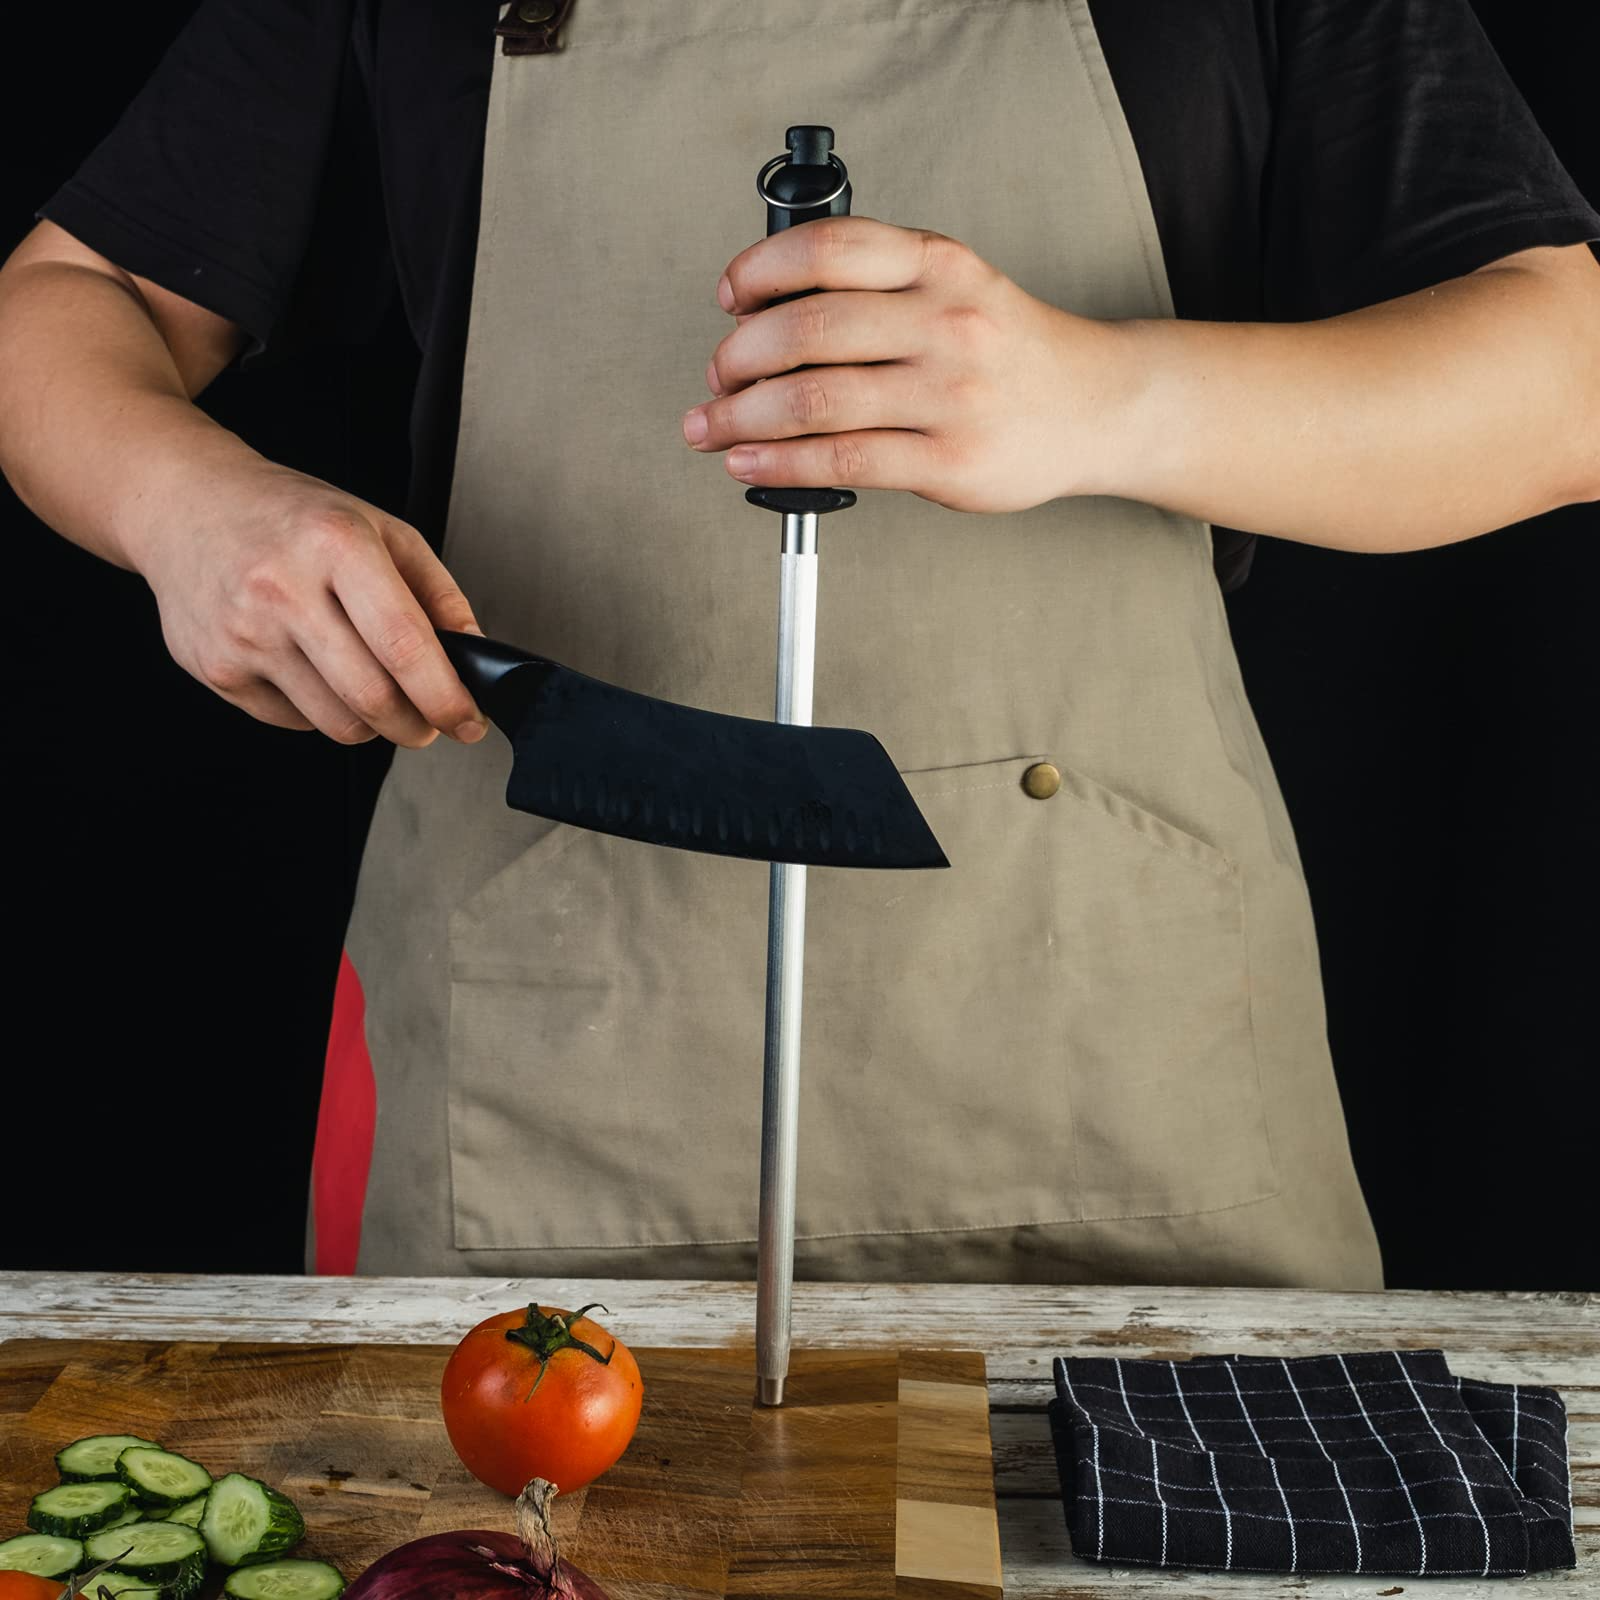 KUMA Kitchen Knife Sharpener - USER FRIENDLY - 8 Inch Steel Honing Rod for  Sharpening your Chef's Knife, Carving Knife, Chopping Knives, And More! 